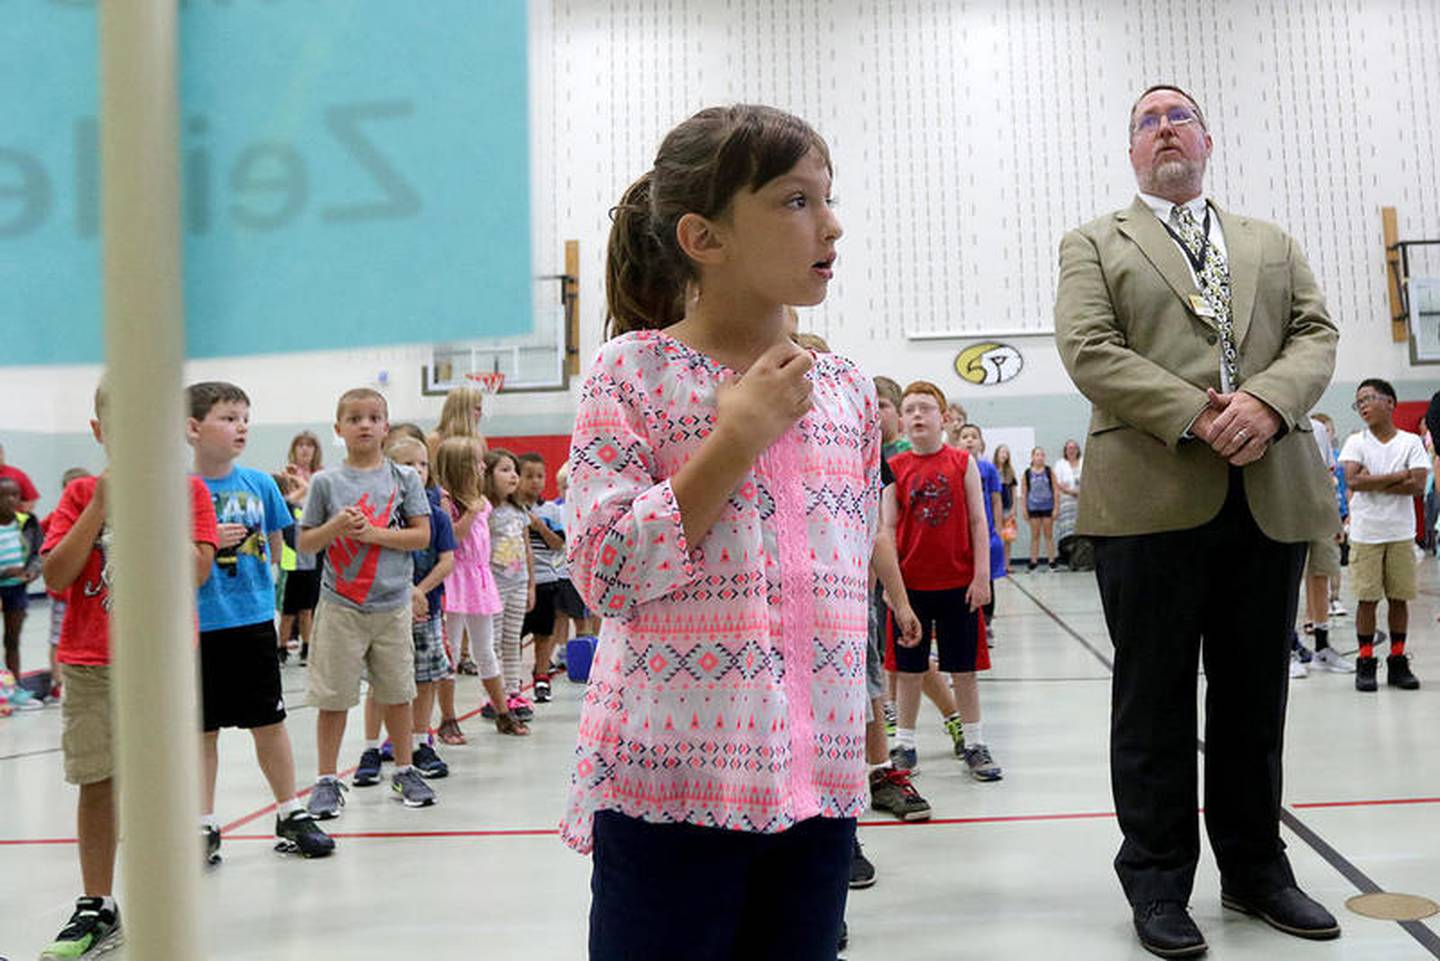 (Caption: South Prairie Elementary School third grade student Jenna Garnet (center) sings the school song along with classmates and principal Kreg Wesley (right) during the first day of school on Wednesday, Aug. 16, 2017 at South Prairie Elementary School in Sycamore.)

Samples must be sent to an Illinois Environmental Protection Agency-accredited lab, and test results will be sent the Illinois Department of Public Health.

The state requires that any potable water source that tests at more than 20 parts per billion must be remediated, meaning fixing pipes and other infrastructure.